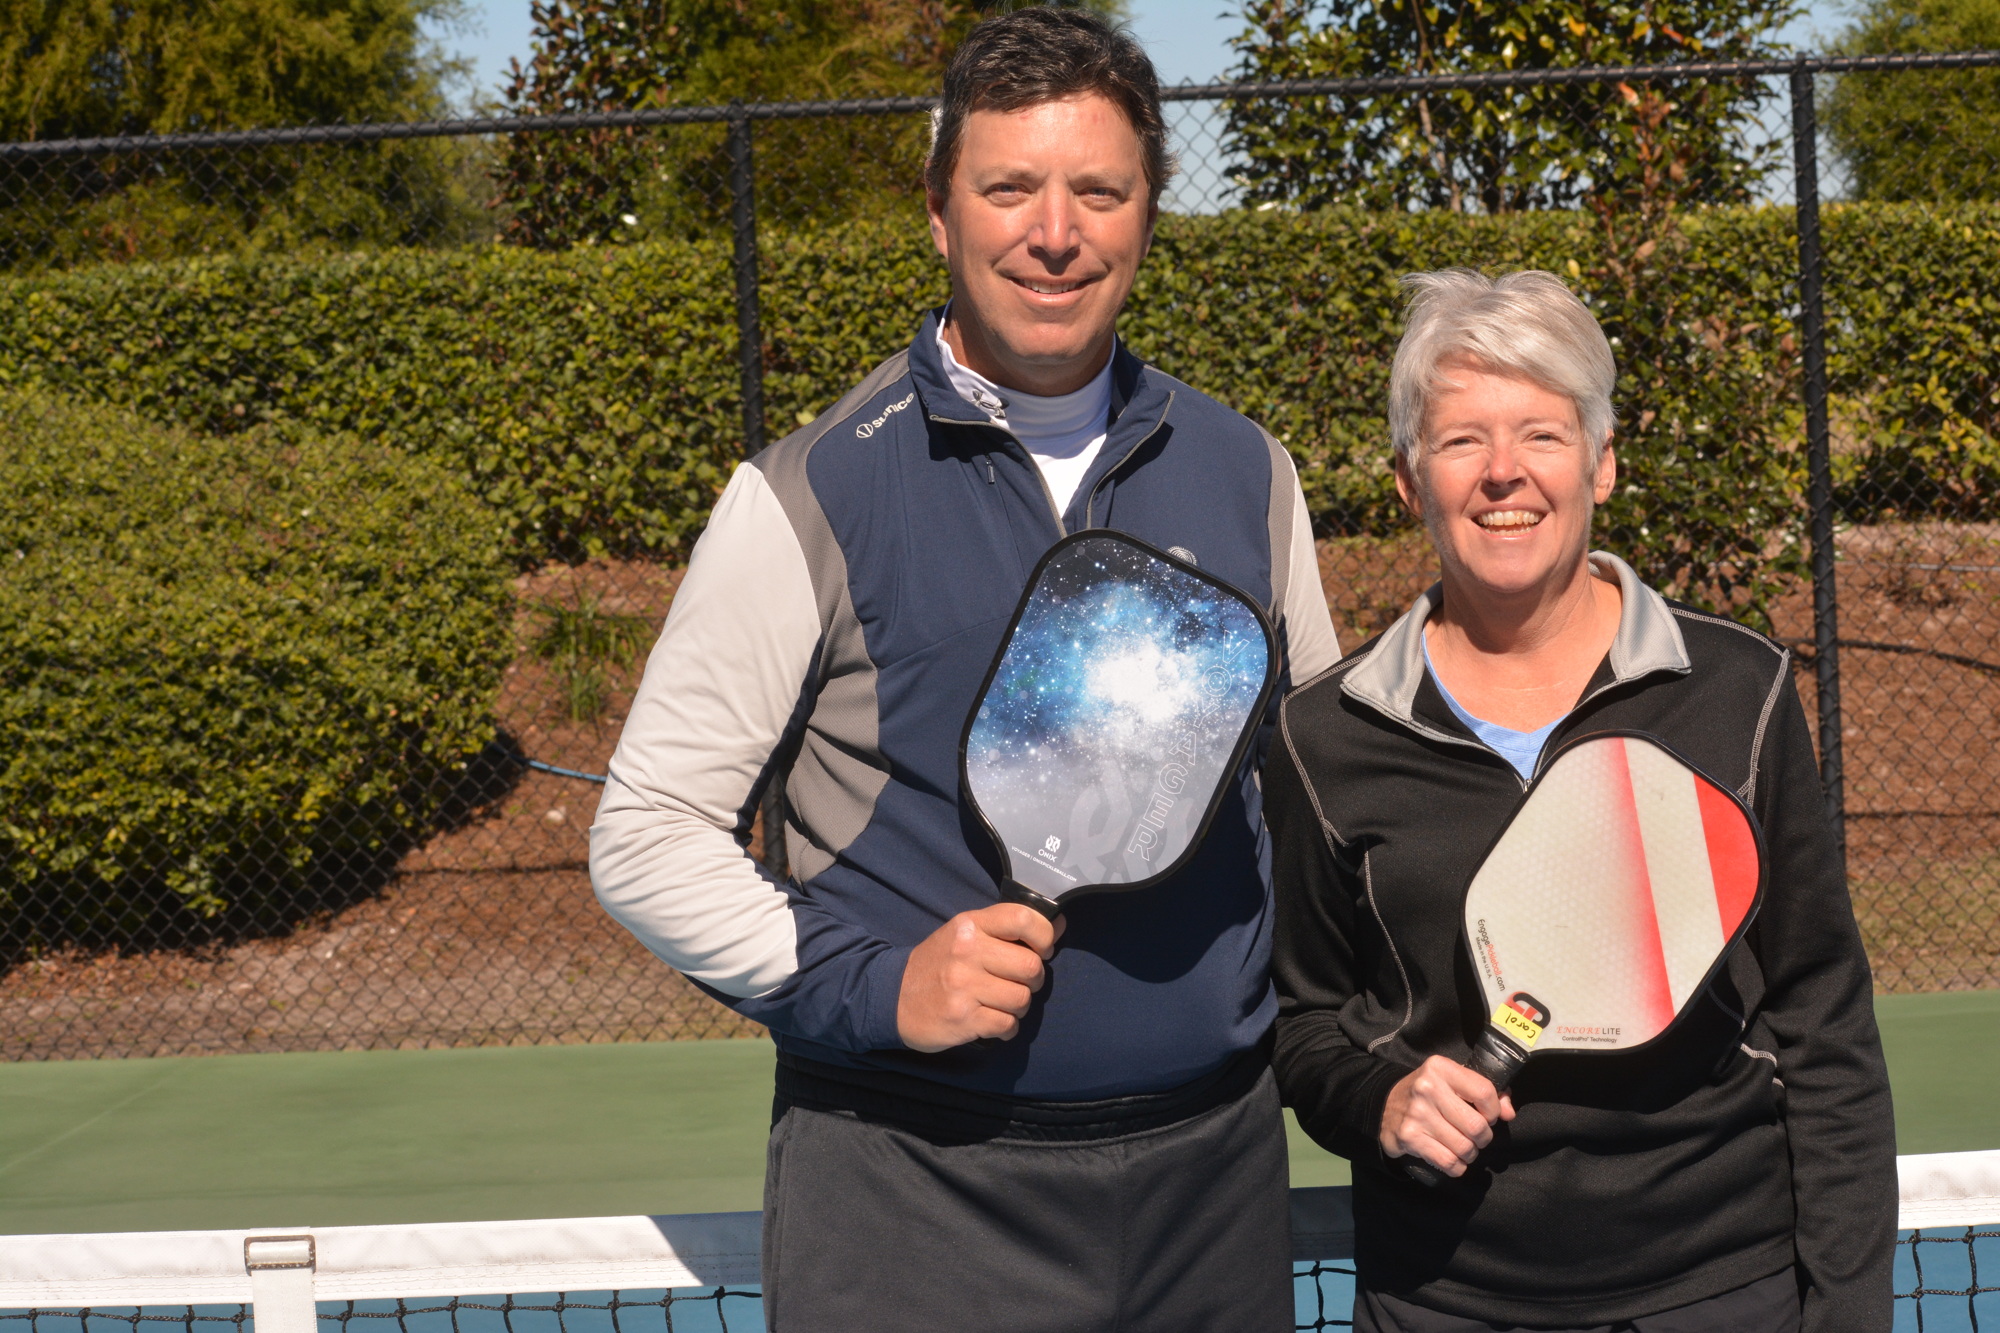 Bob Haskin and Carol Lucas are the president and vice president of the Lakewood Ranch Pickleball Club, which they started in September. The club has 126 members.